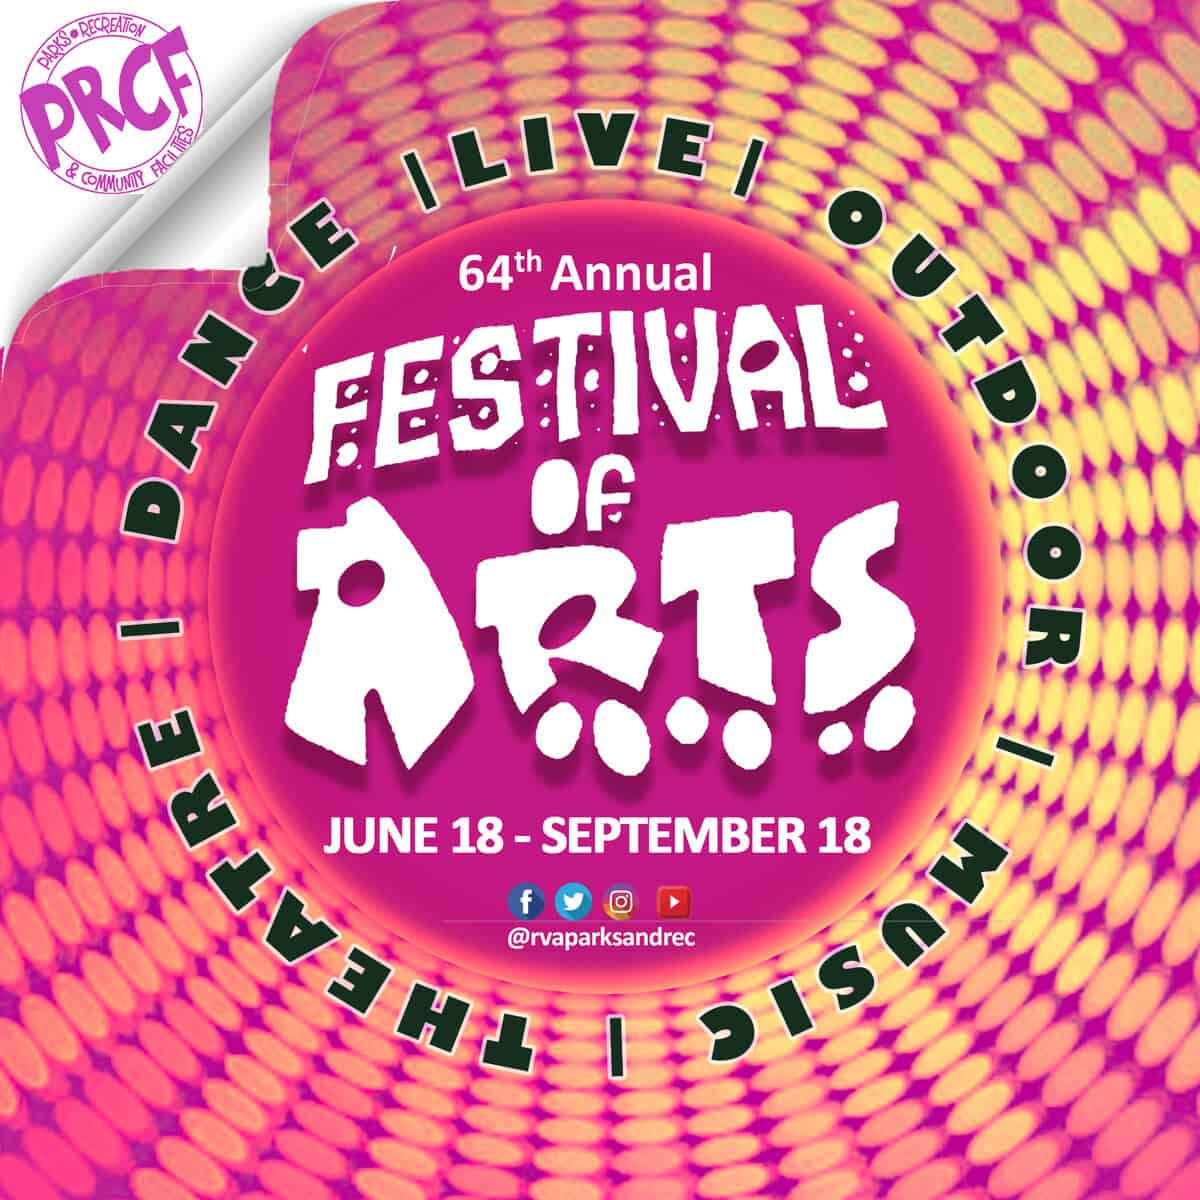 Dogwood Dell Festival of the Arts FREE Entertainment & Events